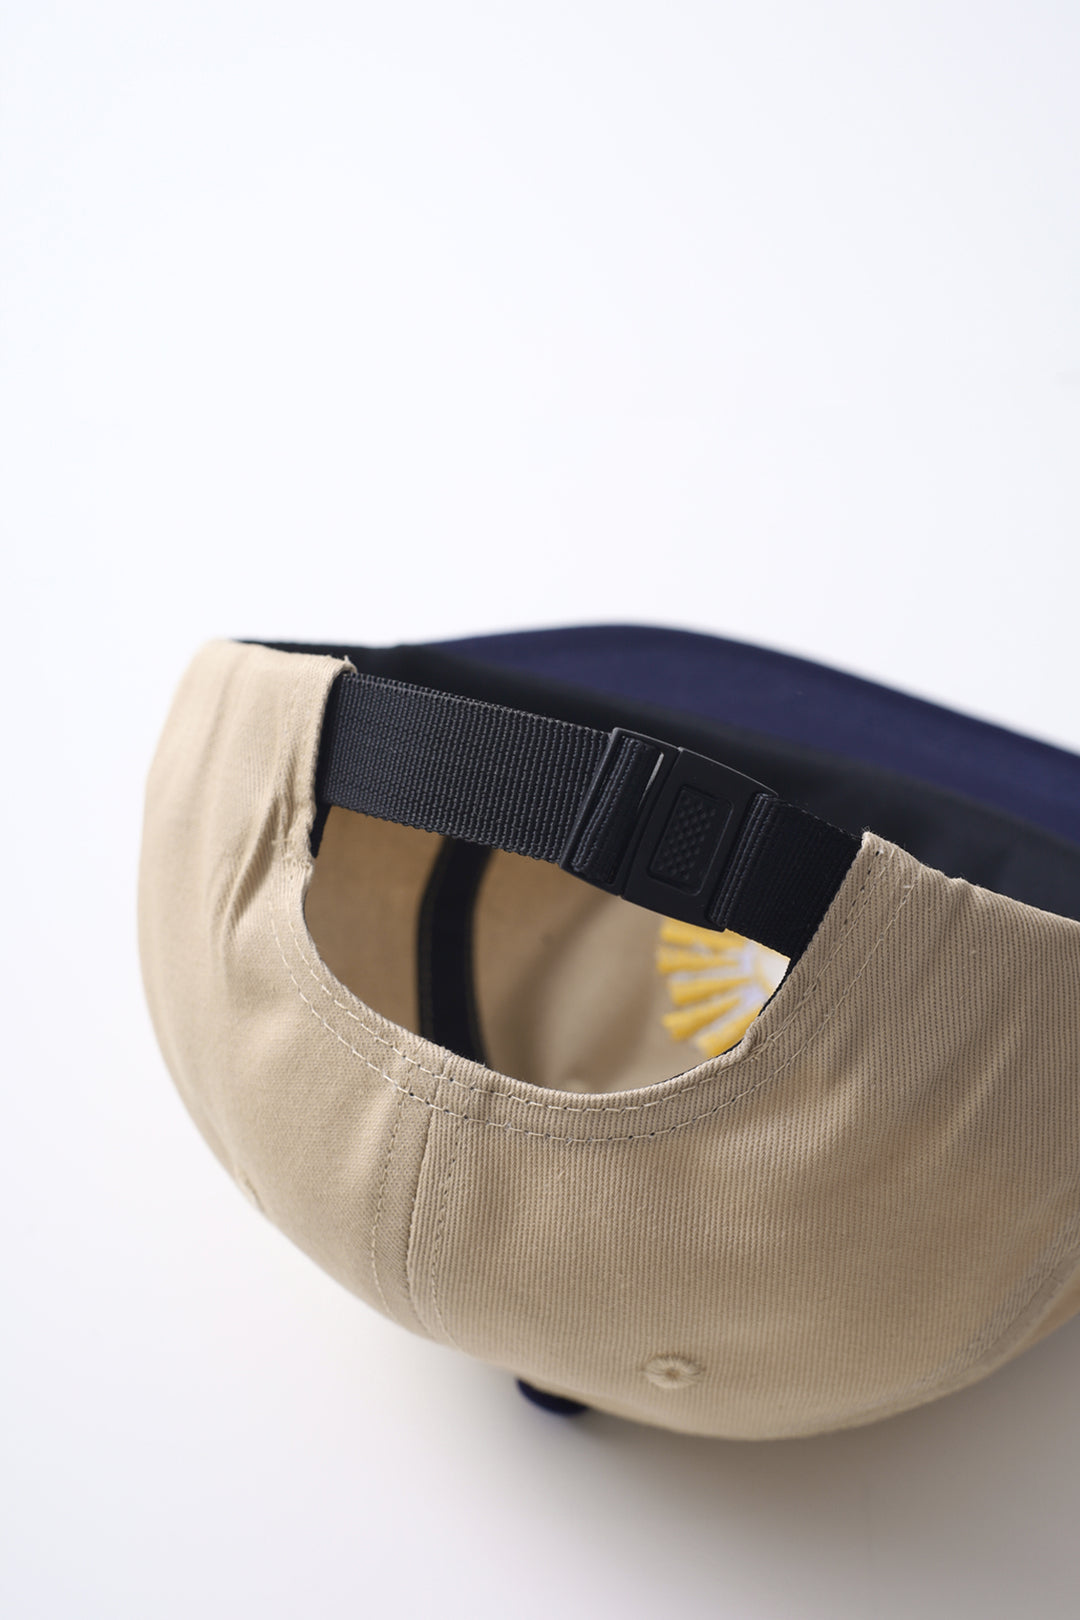 Service Works - Sunny Side Up Cap - Tan/Navy